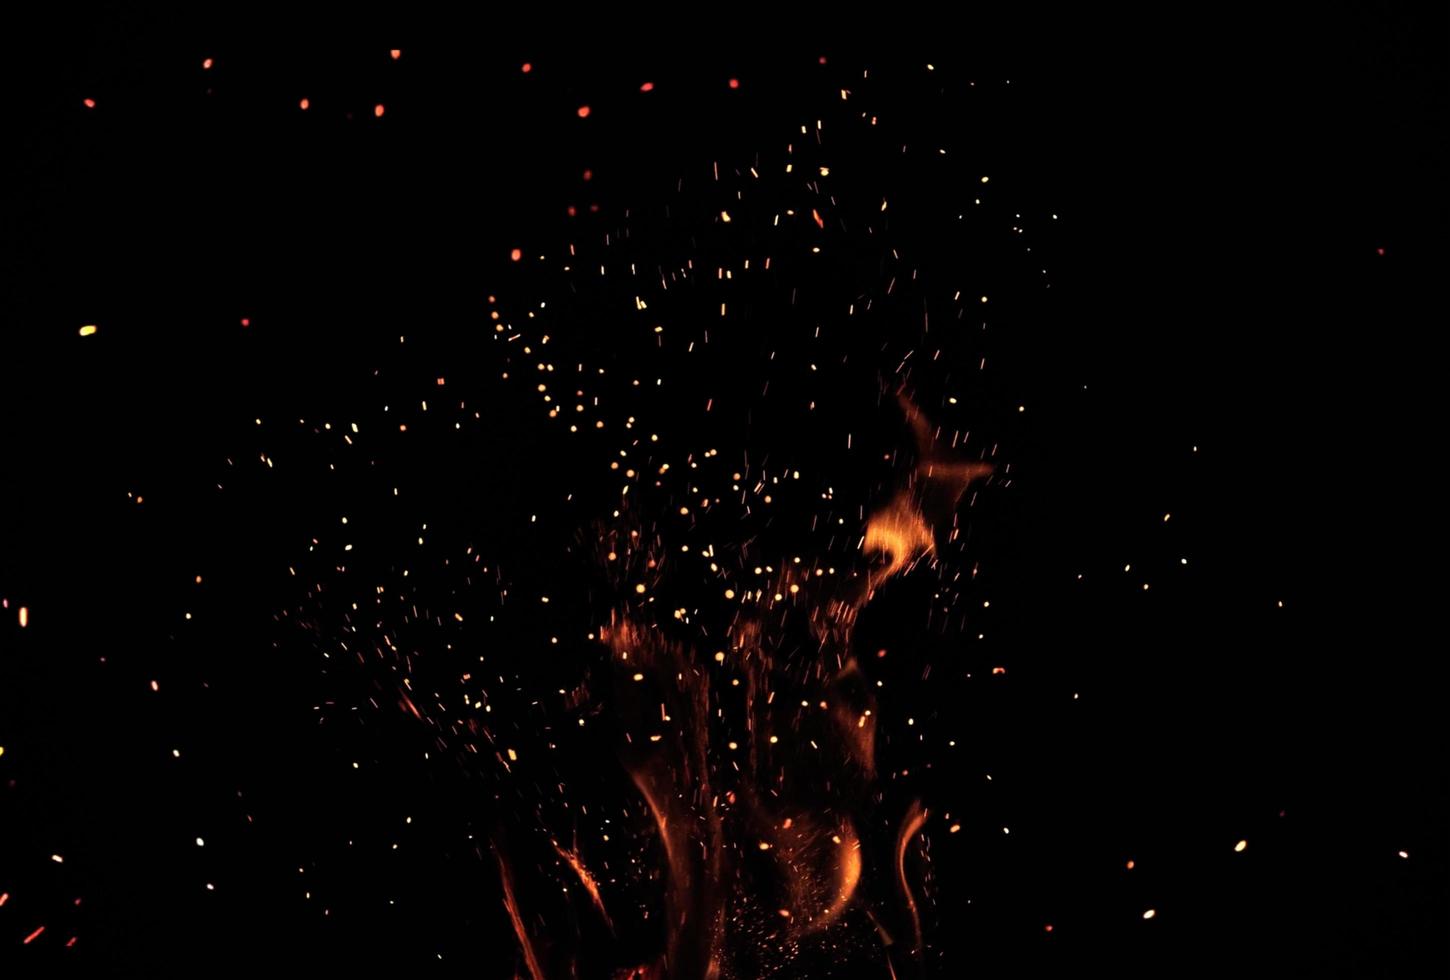 fire burning sparks particles overlay texture black background stock photo